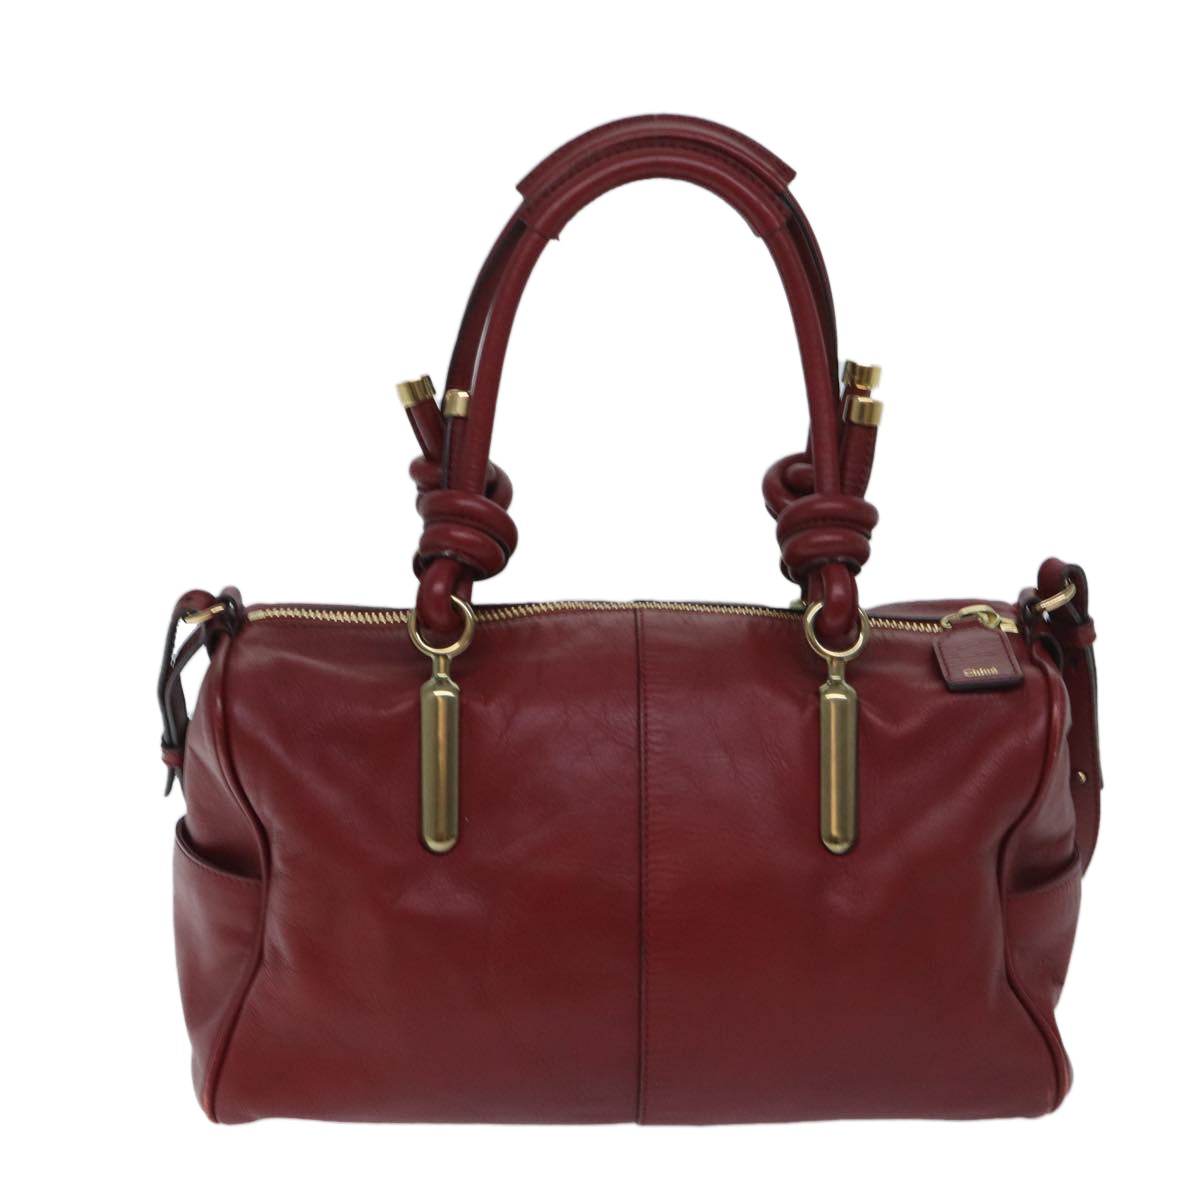 Chloe Hand Bag Leather 2way Red Auth yk11417